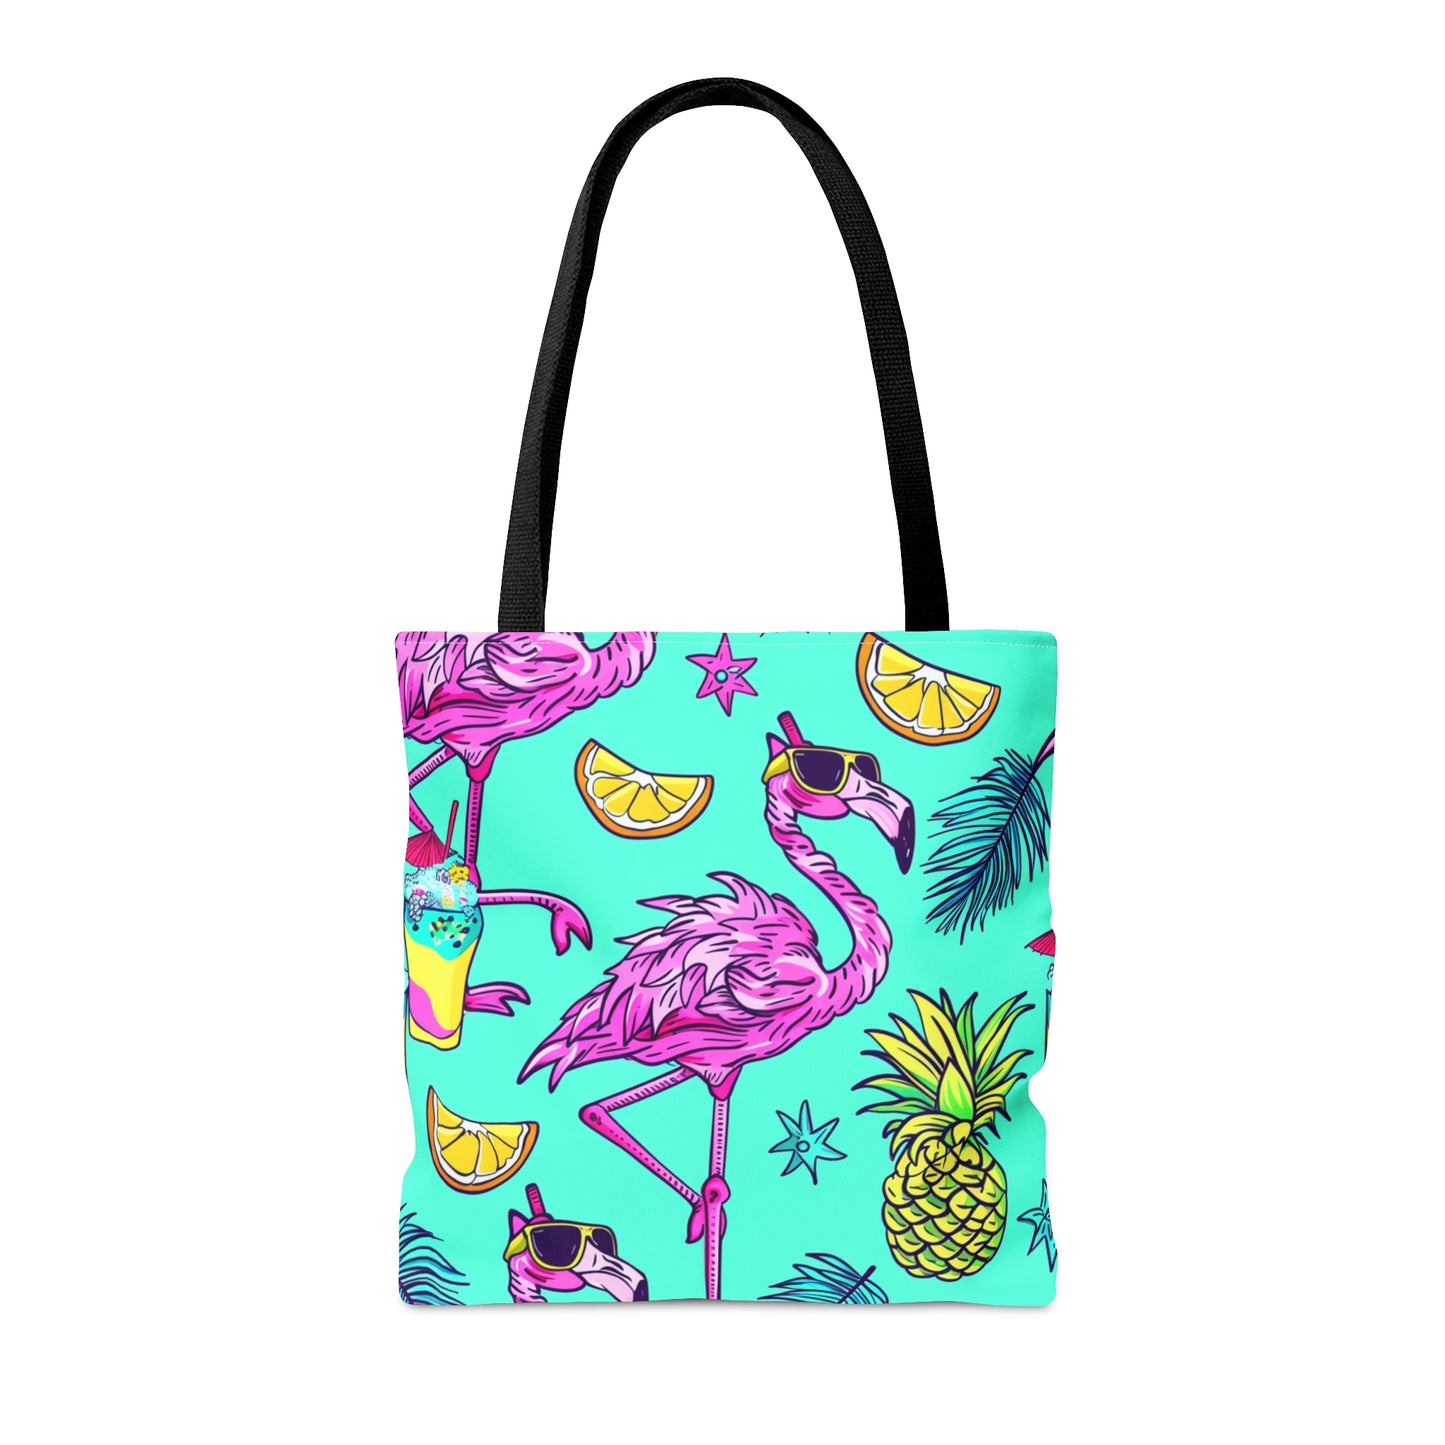 Surface Beach Volleyball Club Travel Tote Bag